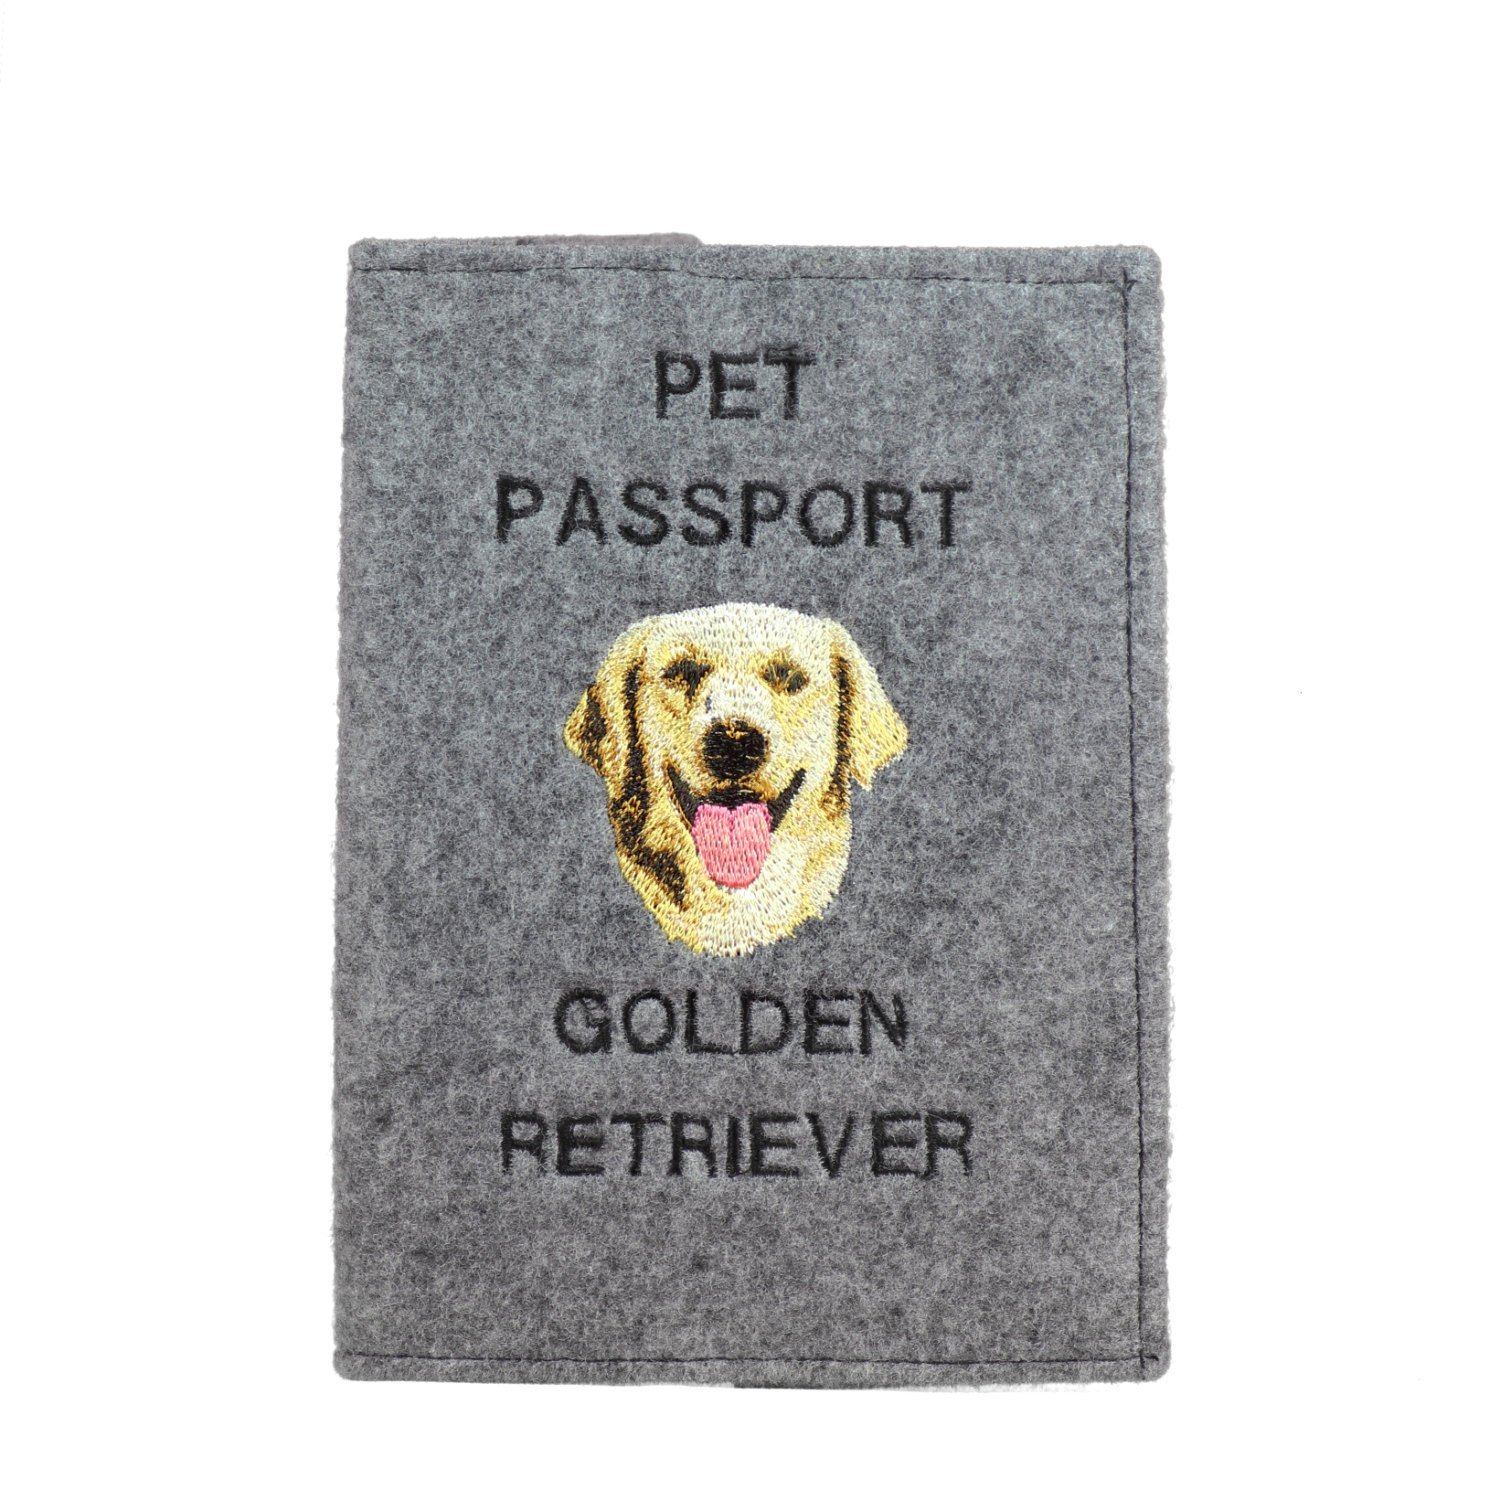 Primary image for Golden Retriever - Passport wallet for the dog with embroidered pattern. New pro